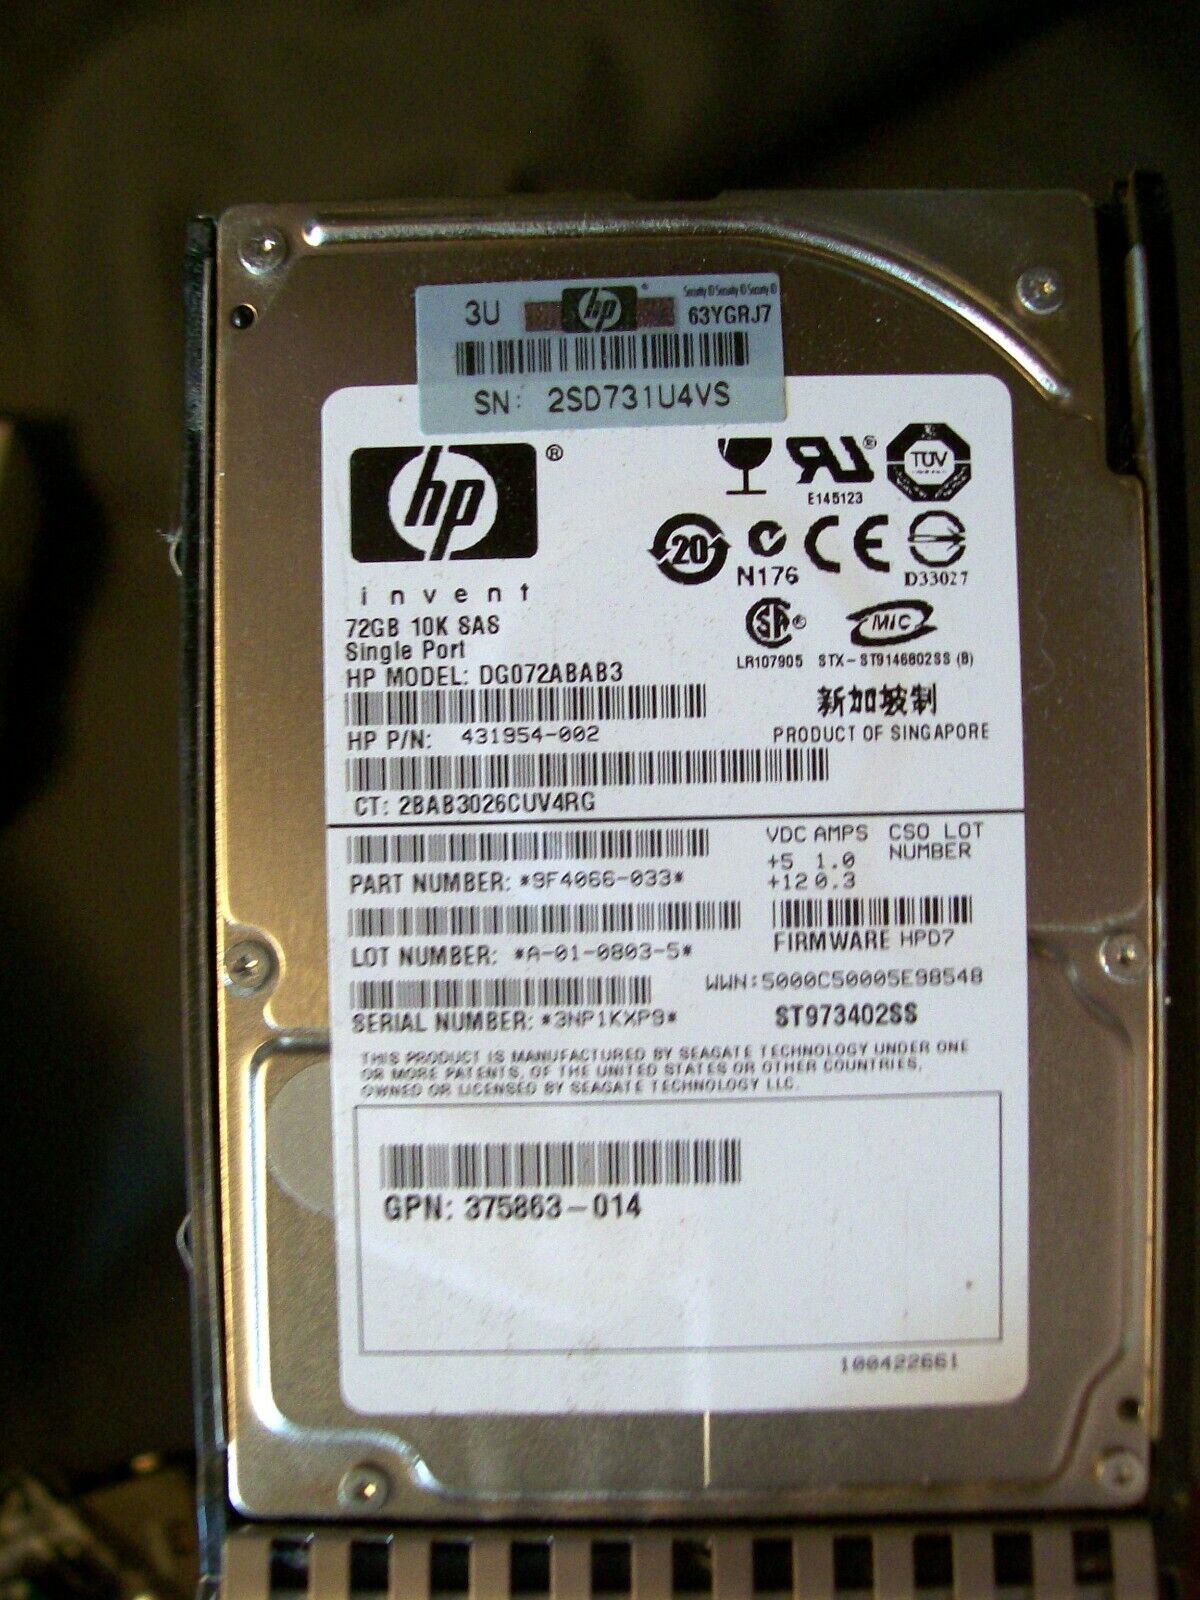 HP INVENT 72GB 10K SAS SINGLE PORT DG072ABAB3 WITH CASE COVER/CADDY